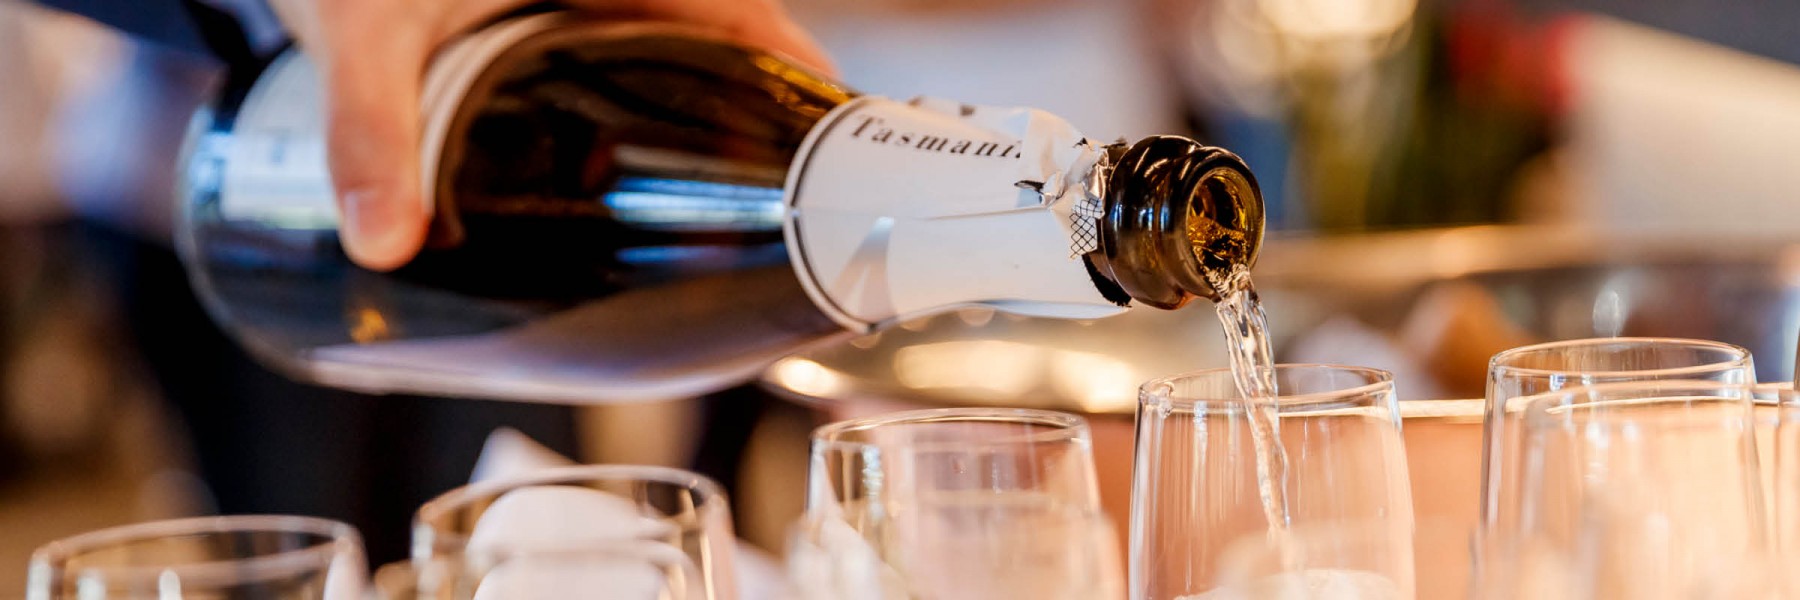 Pouring a glass of sparkling wine from a bottle with the word Tasmania on the neck